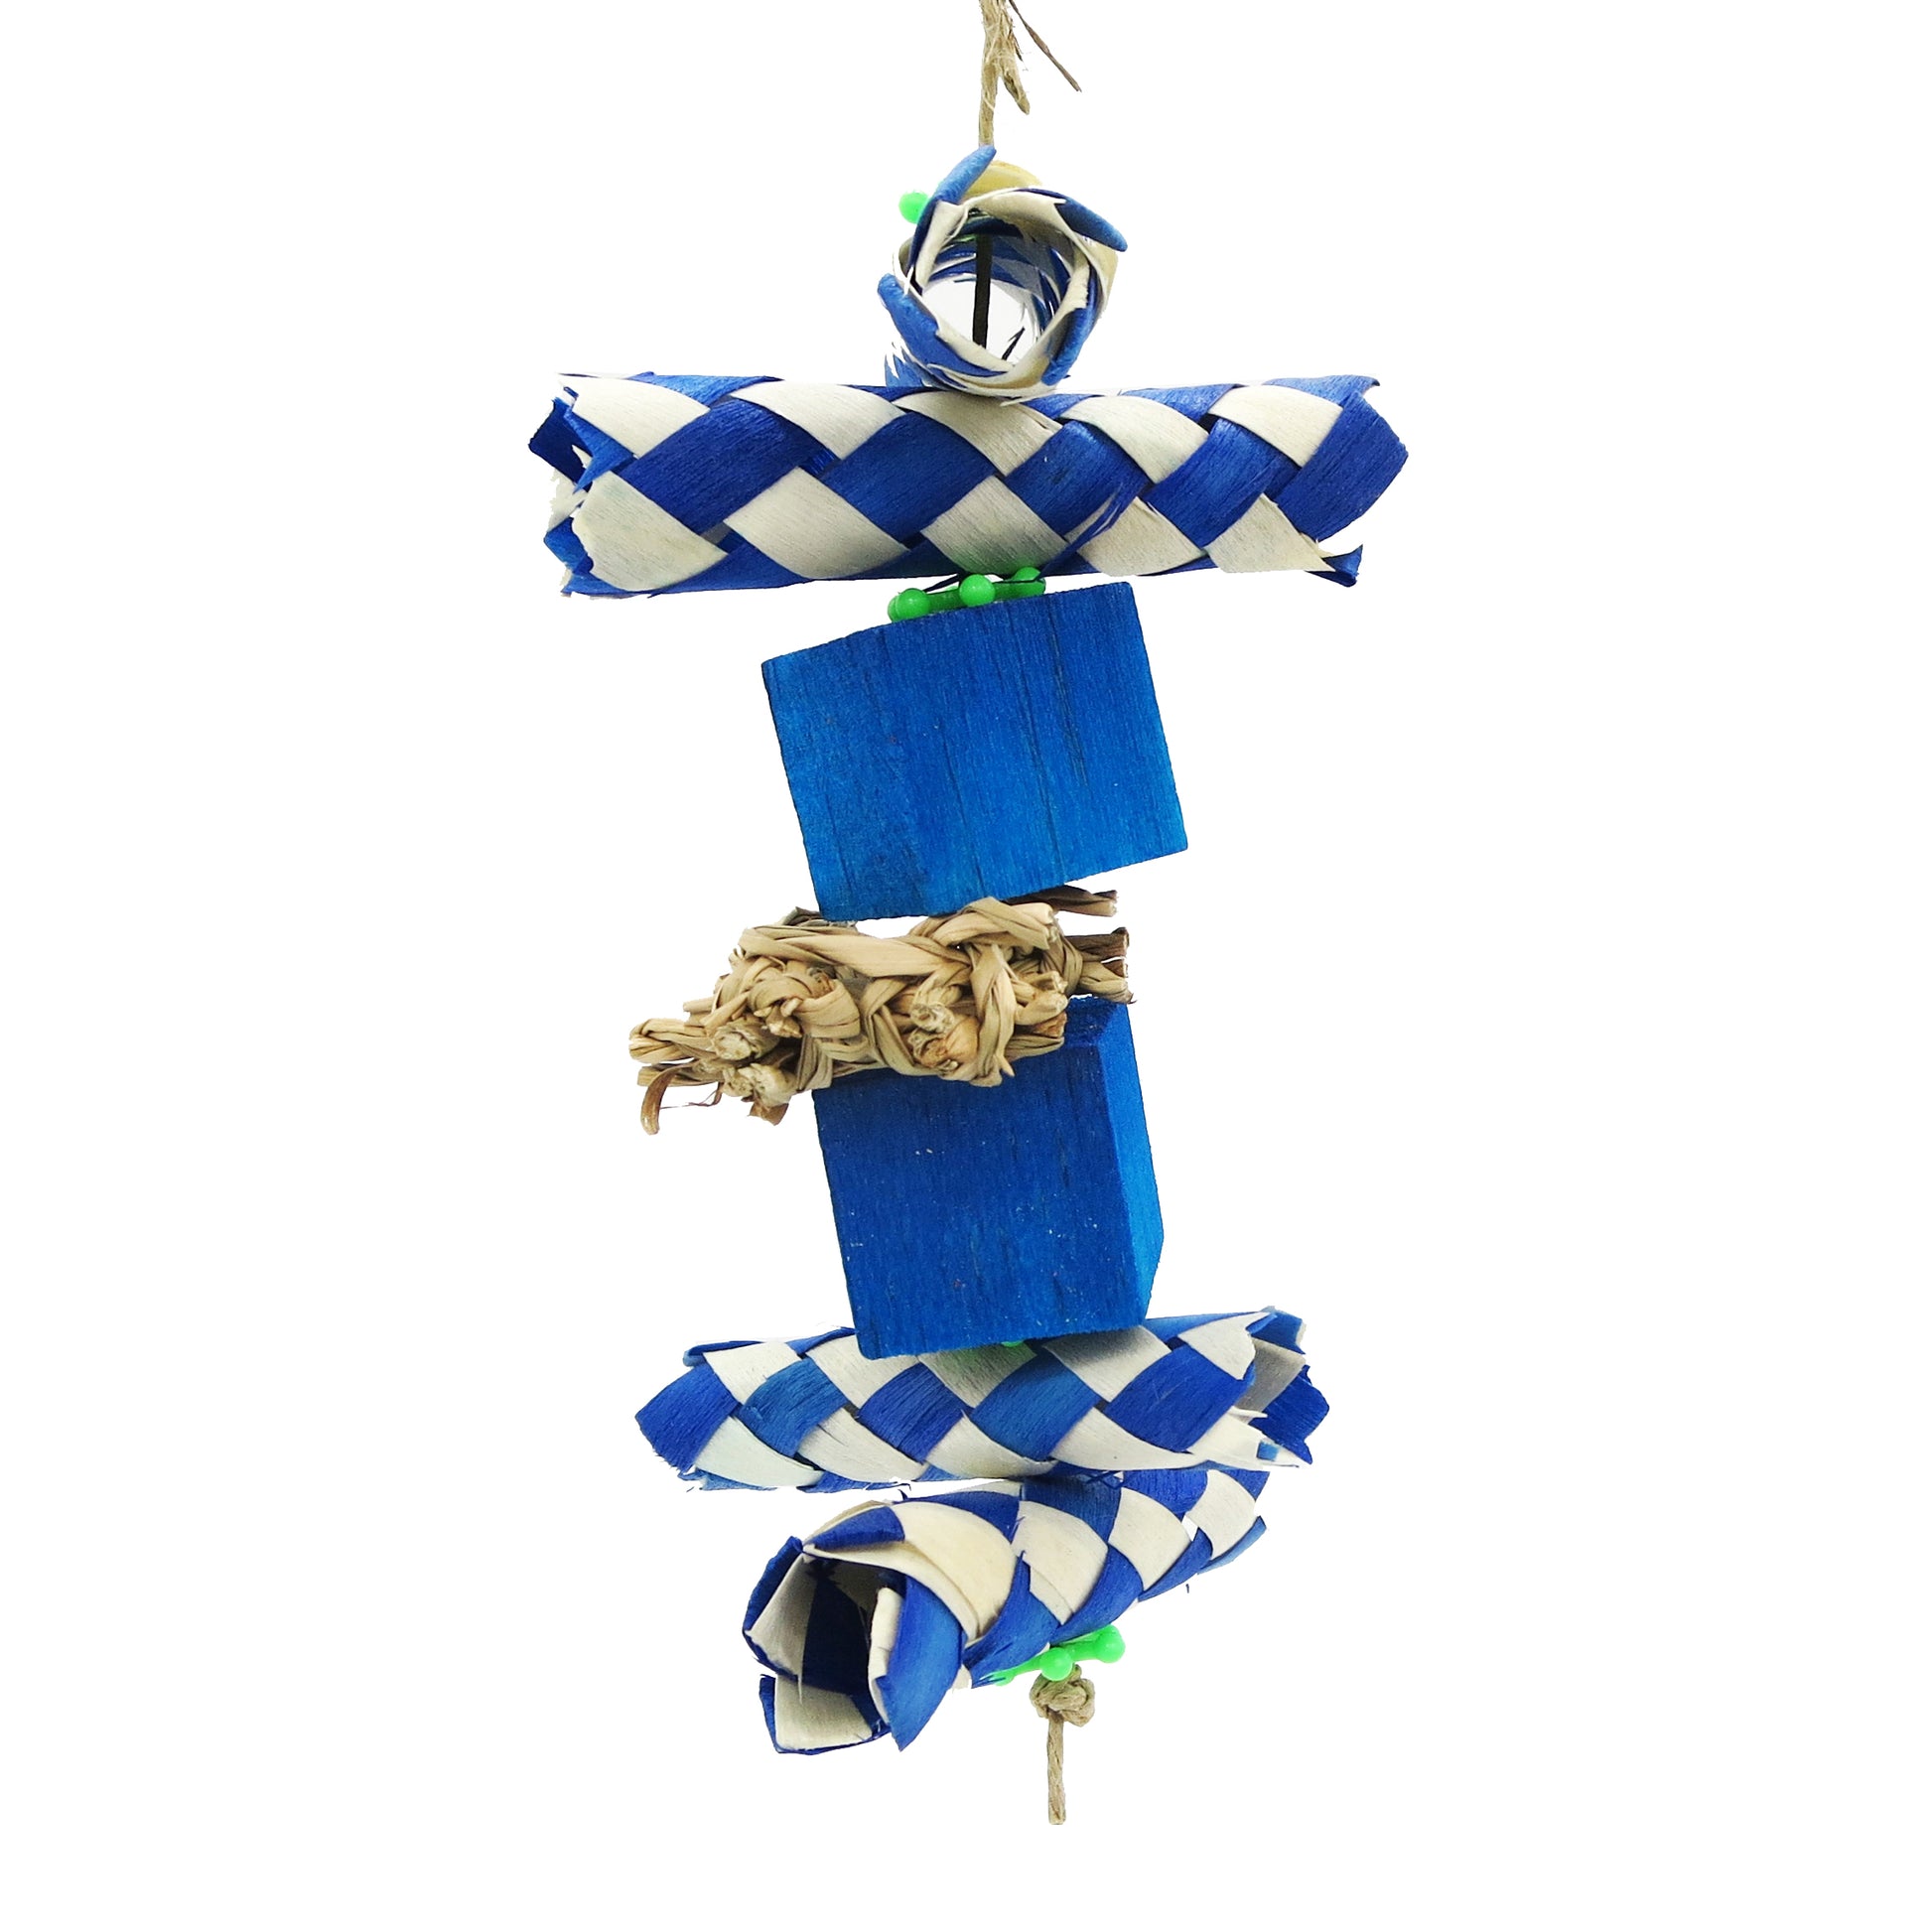 Bird toy with palm finger traps cut in half, two balsa blocks, and a piece of seagrass in the center. Blue coloration. 